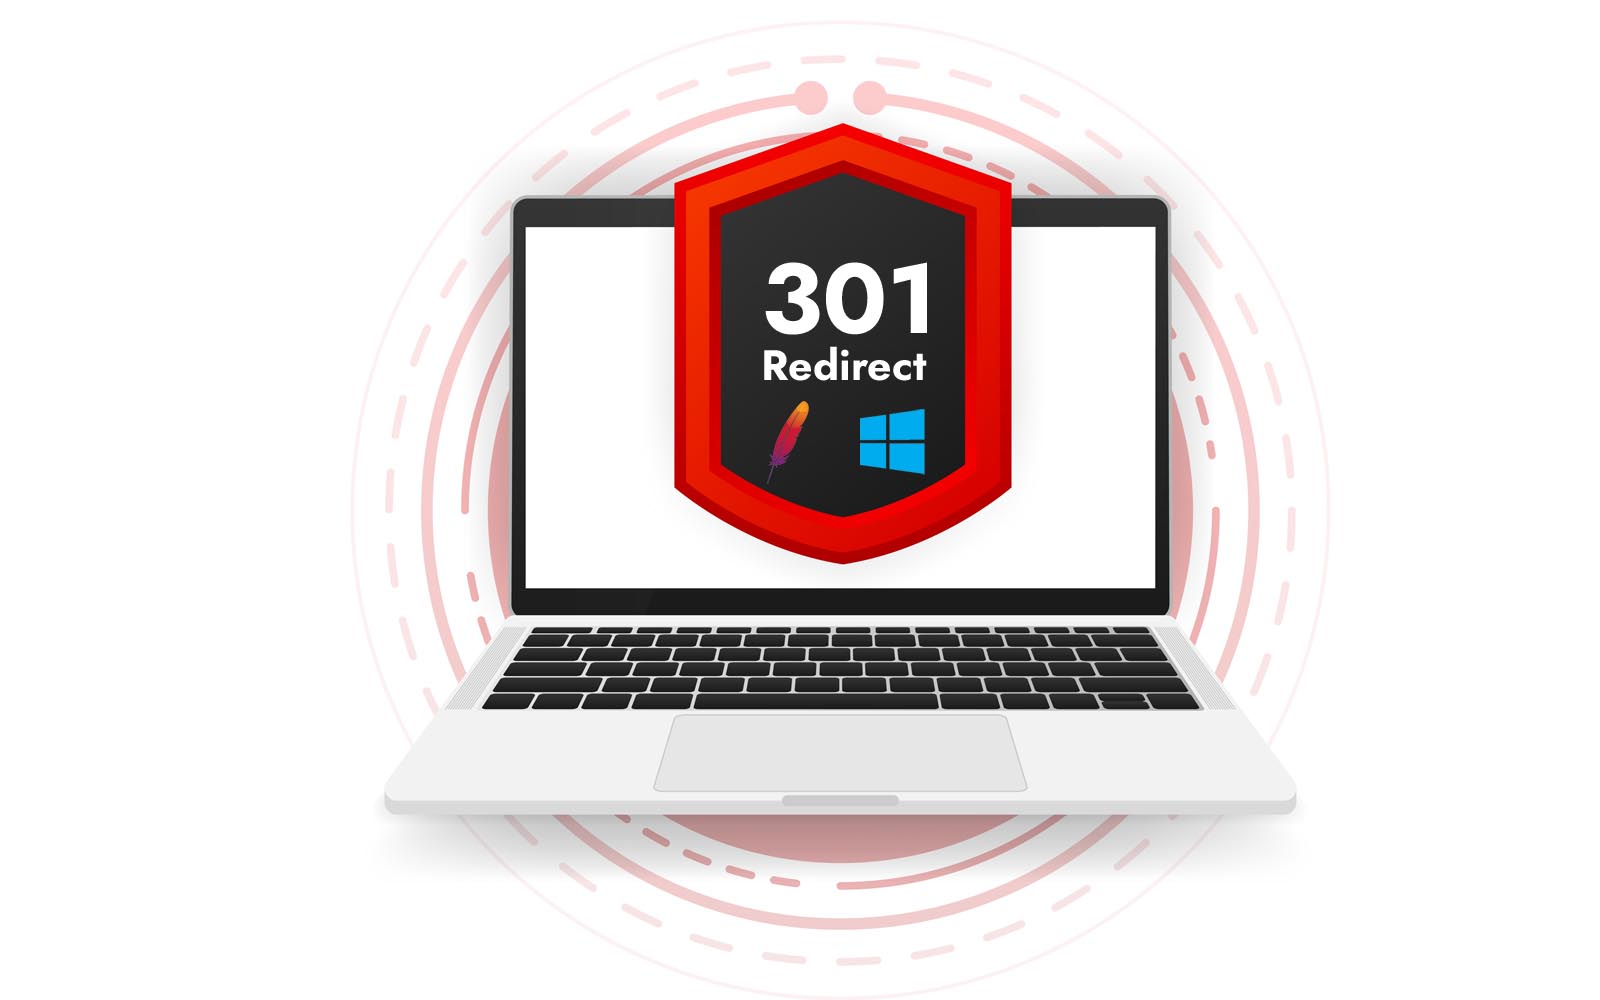 How to do a 301 Redirect Properly on Apache or Windows Servers